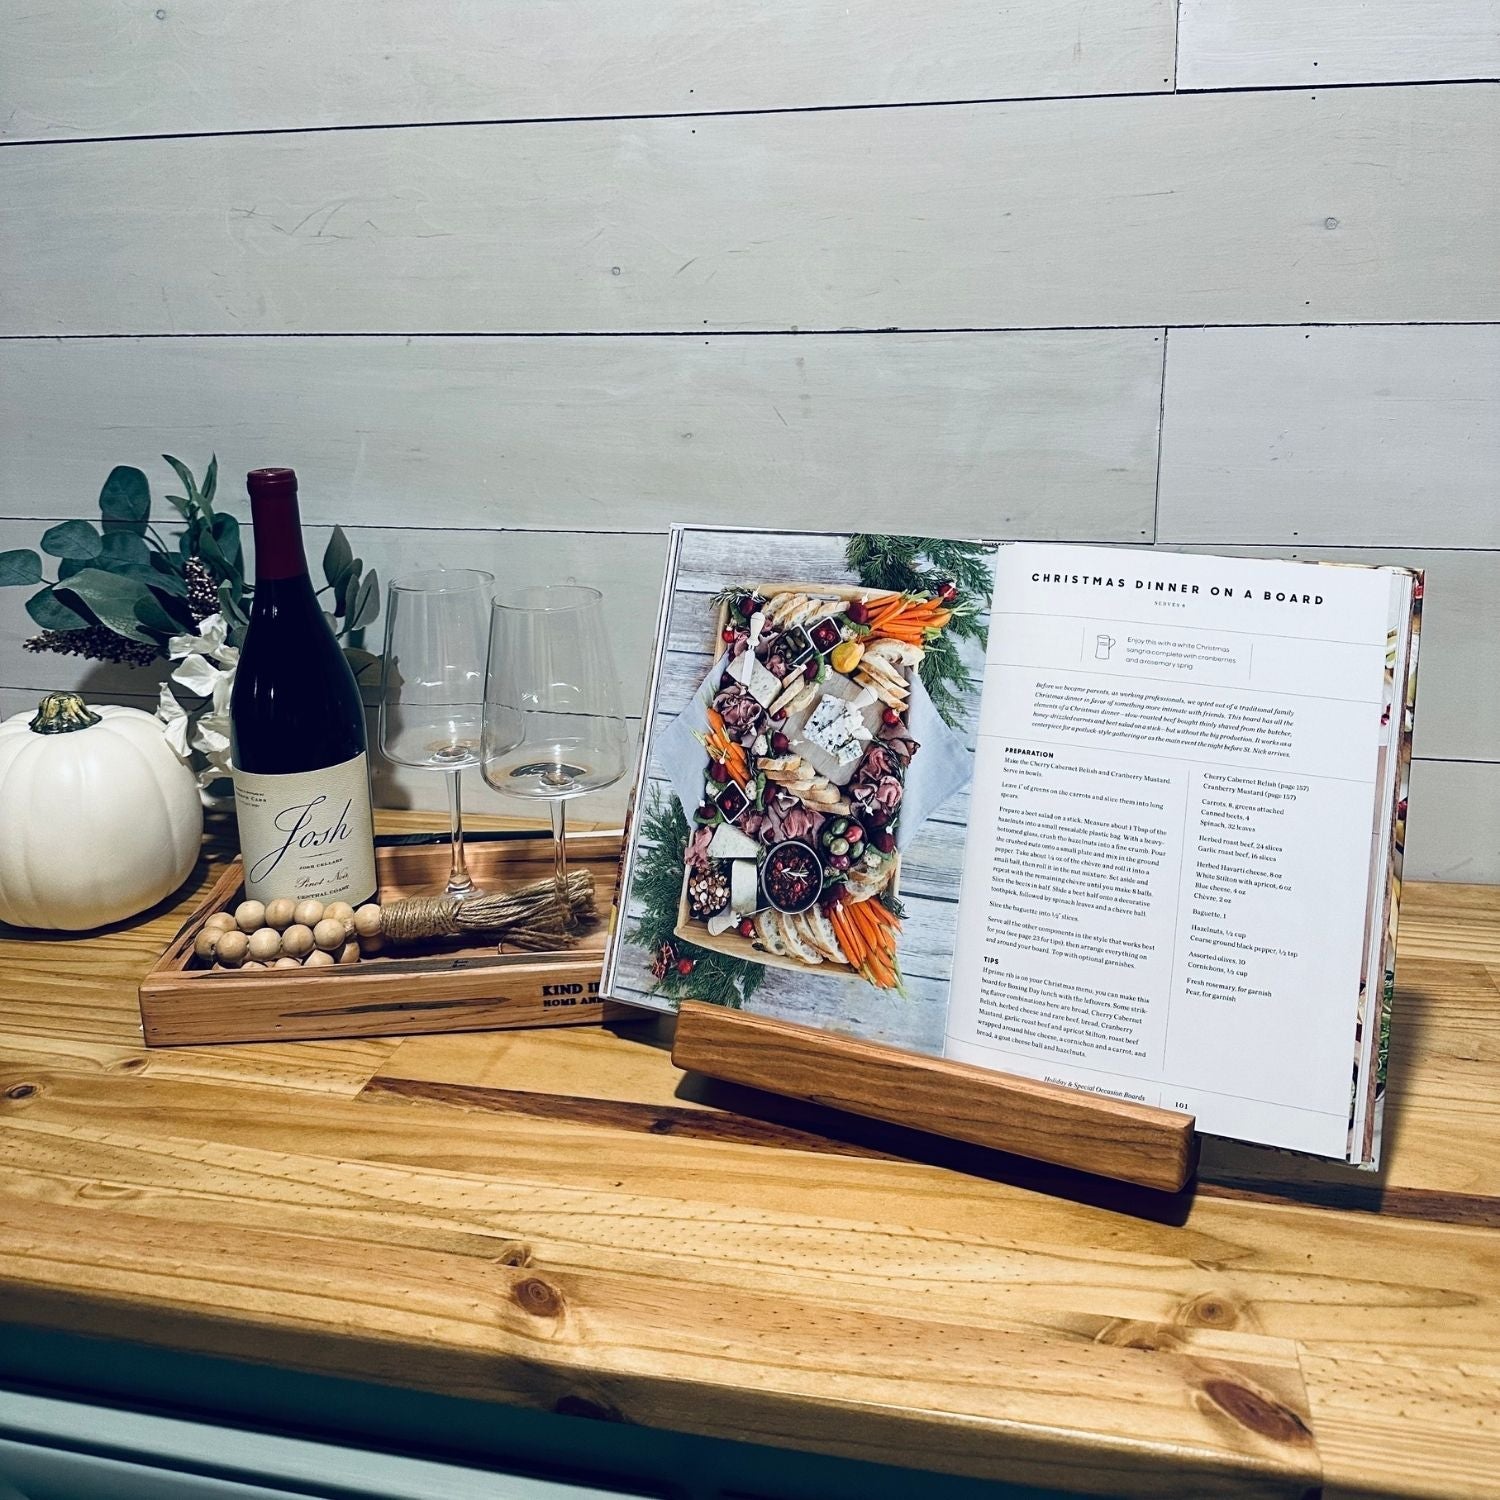 Cookbook holder displaying a recipe book in a stylish kitchen setting